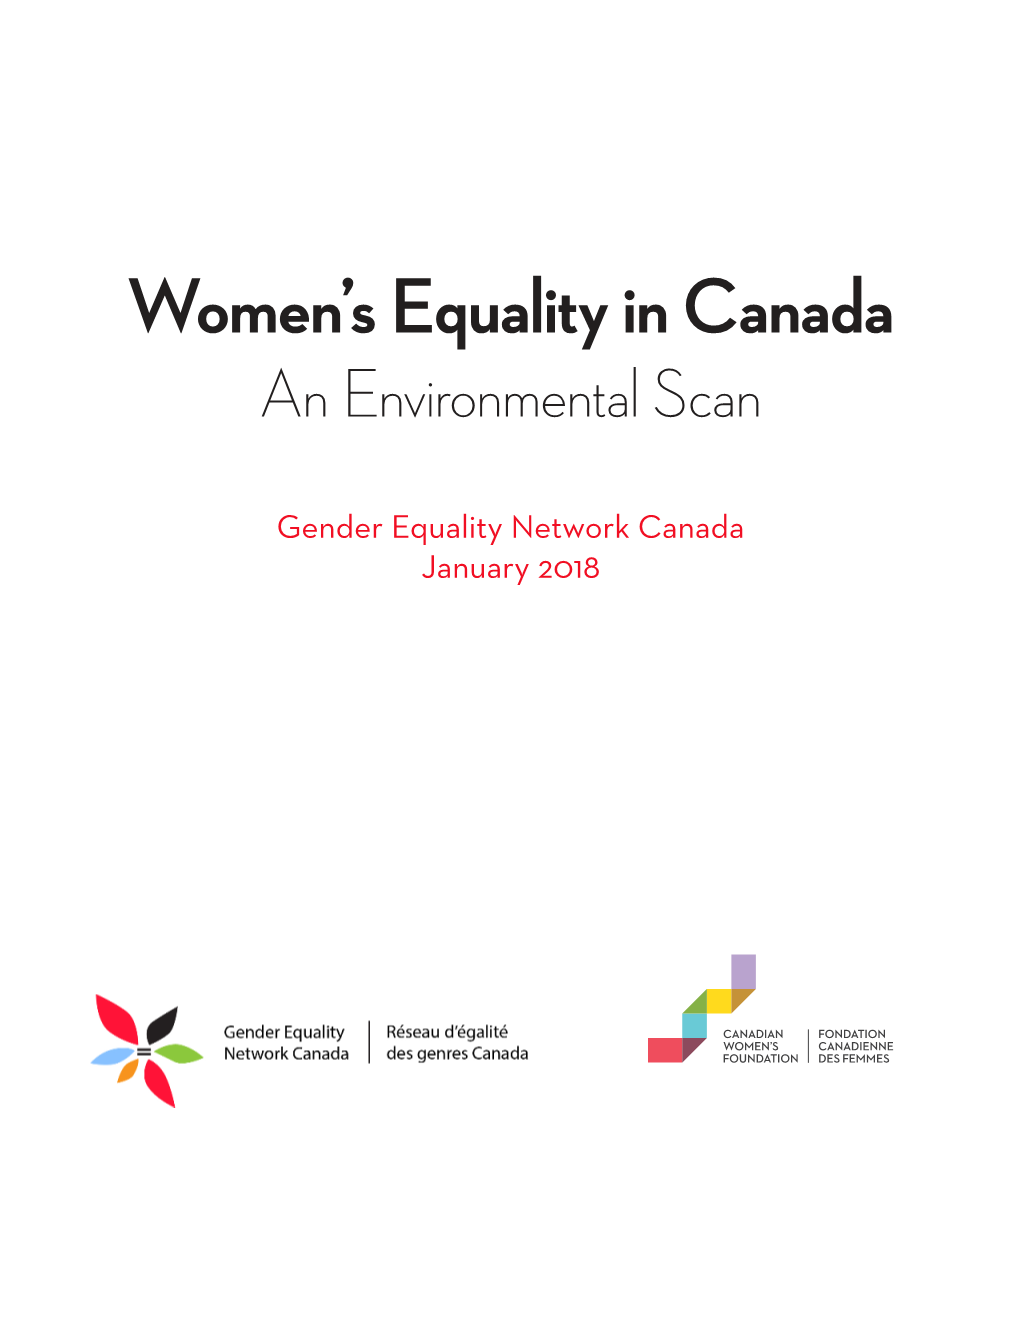 Women's Equality in Canada: an Environmental Scan